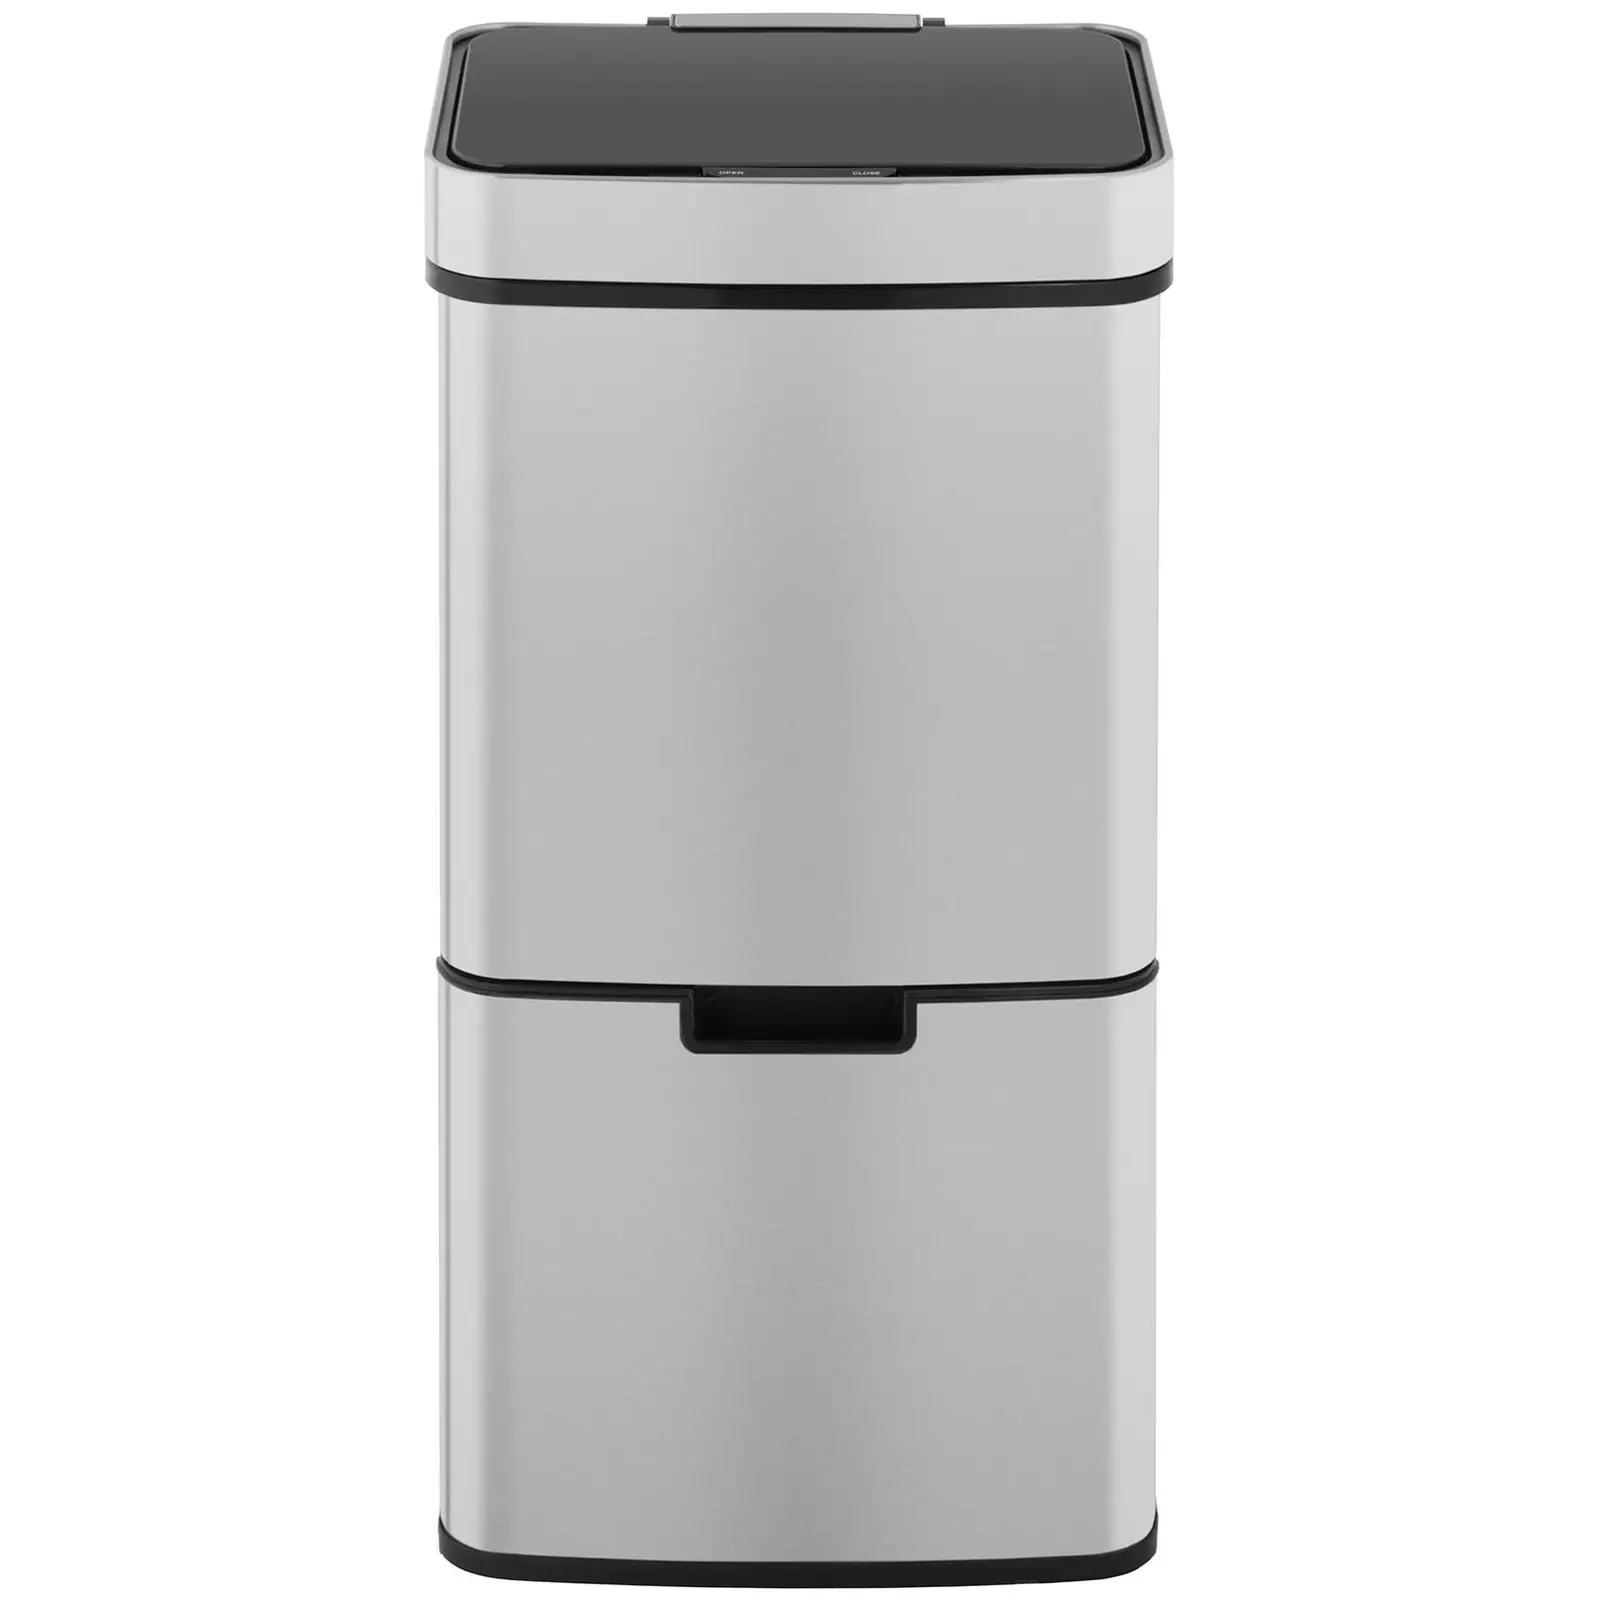 Sensor Trash Can - 72 L - 3 containers - stainless steel